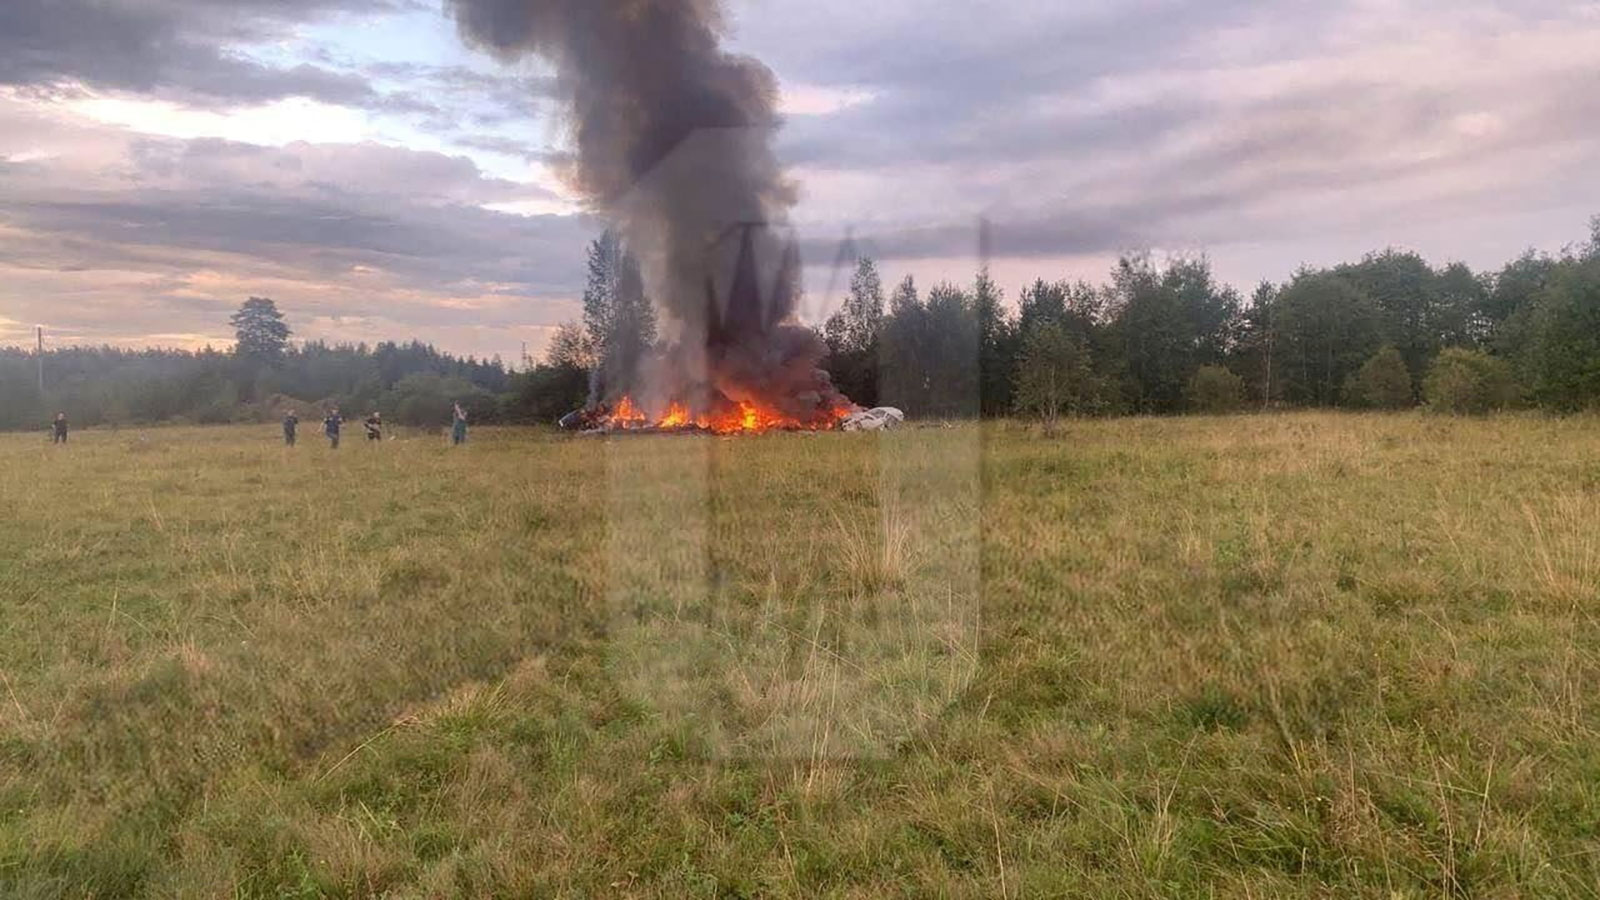 A view shows plane wreckage on fire following an air accident in Tver region, Russia, on August 23. Yevgeny Prigozhin, chief of Russian private mercenary group Wagner, was reportedly listed as a passenger on the private jet.